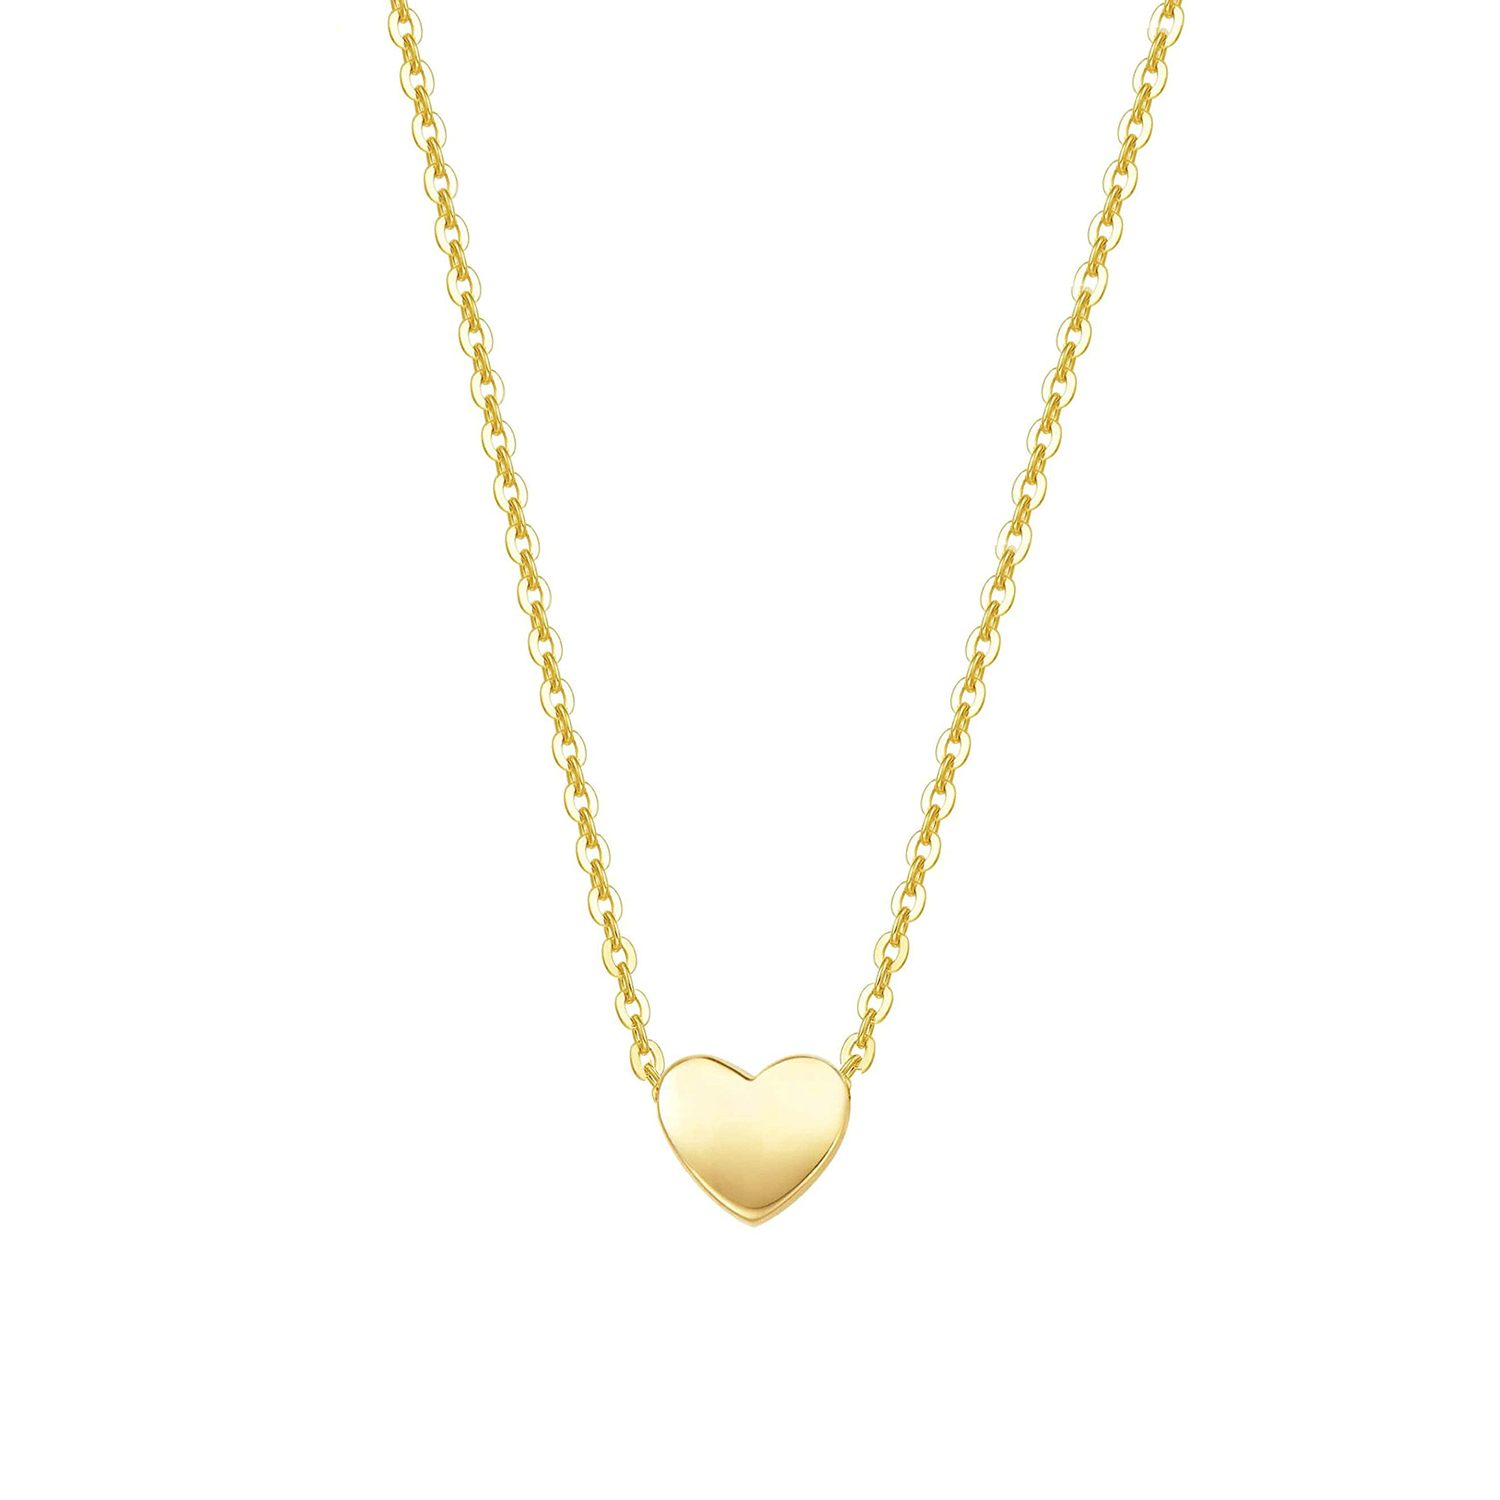 FANCIME "Mini Love" Small Heart 14K Solid Yellow Gold Necklace Main